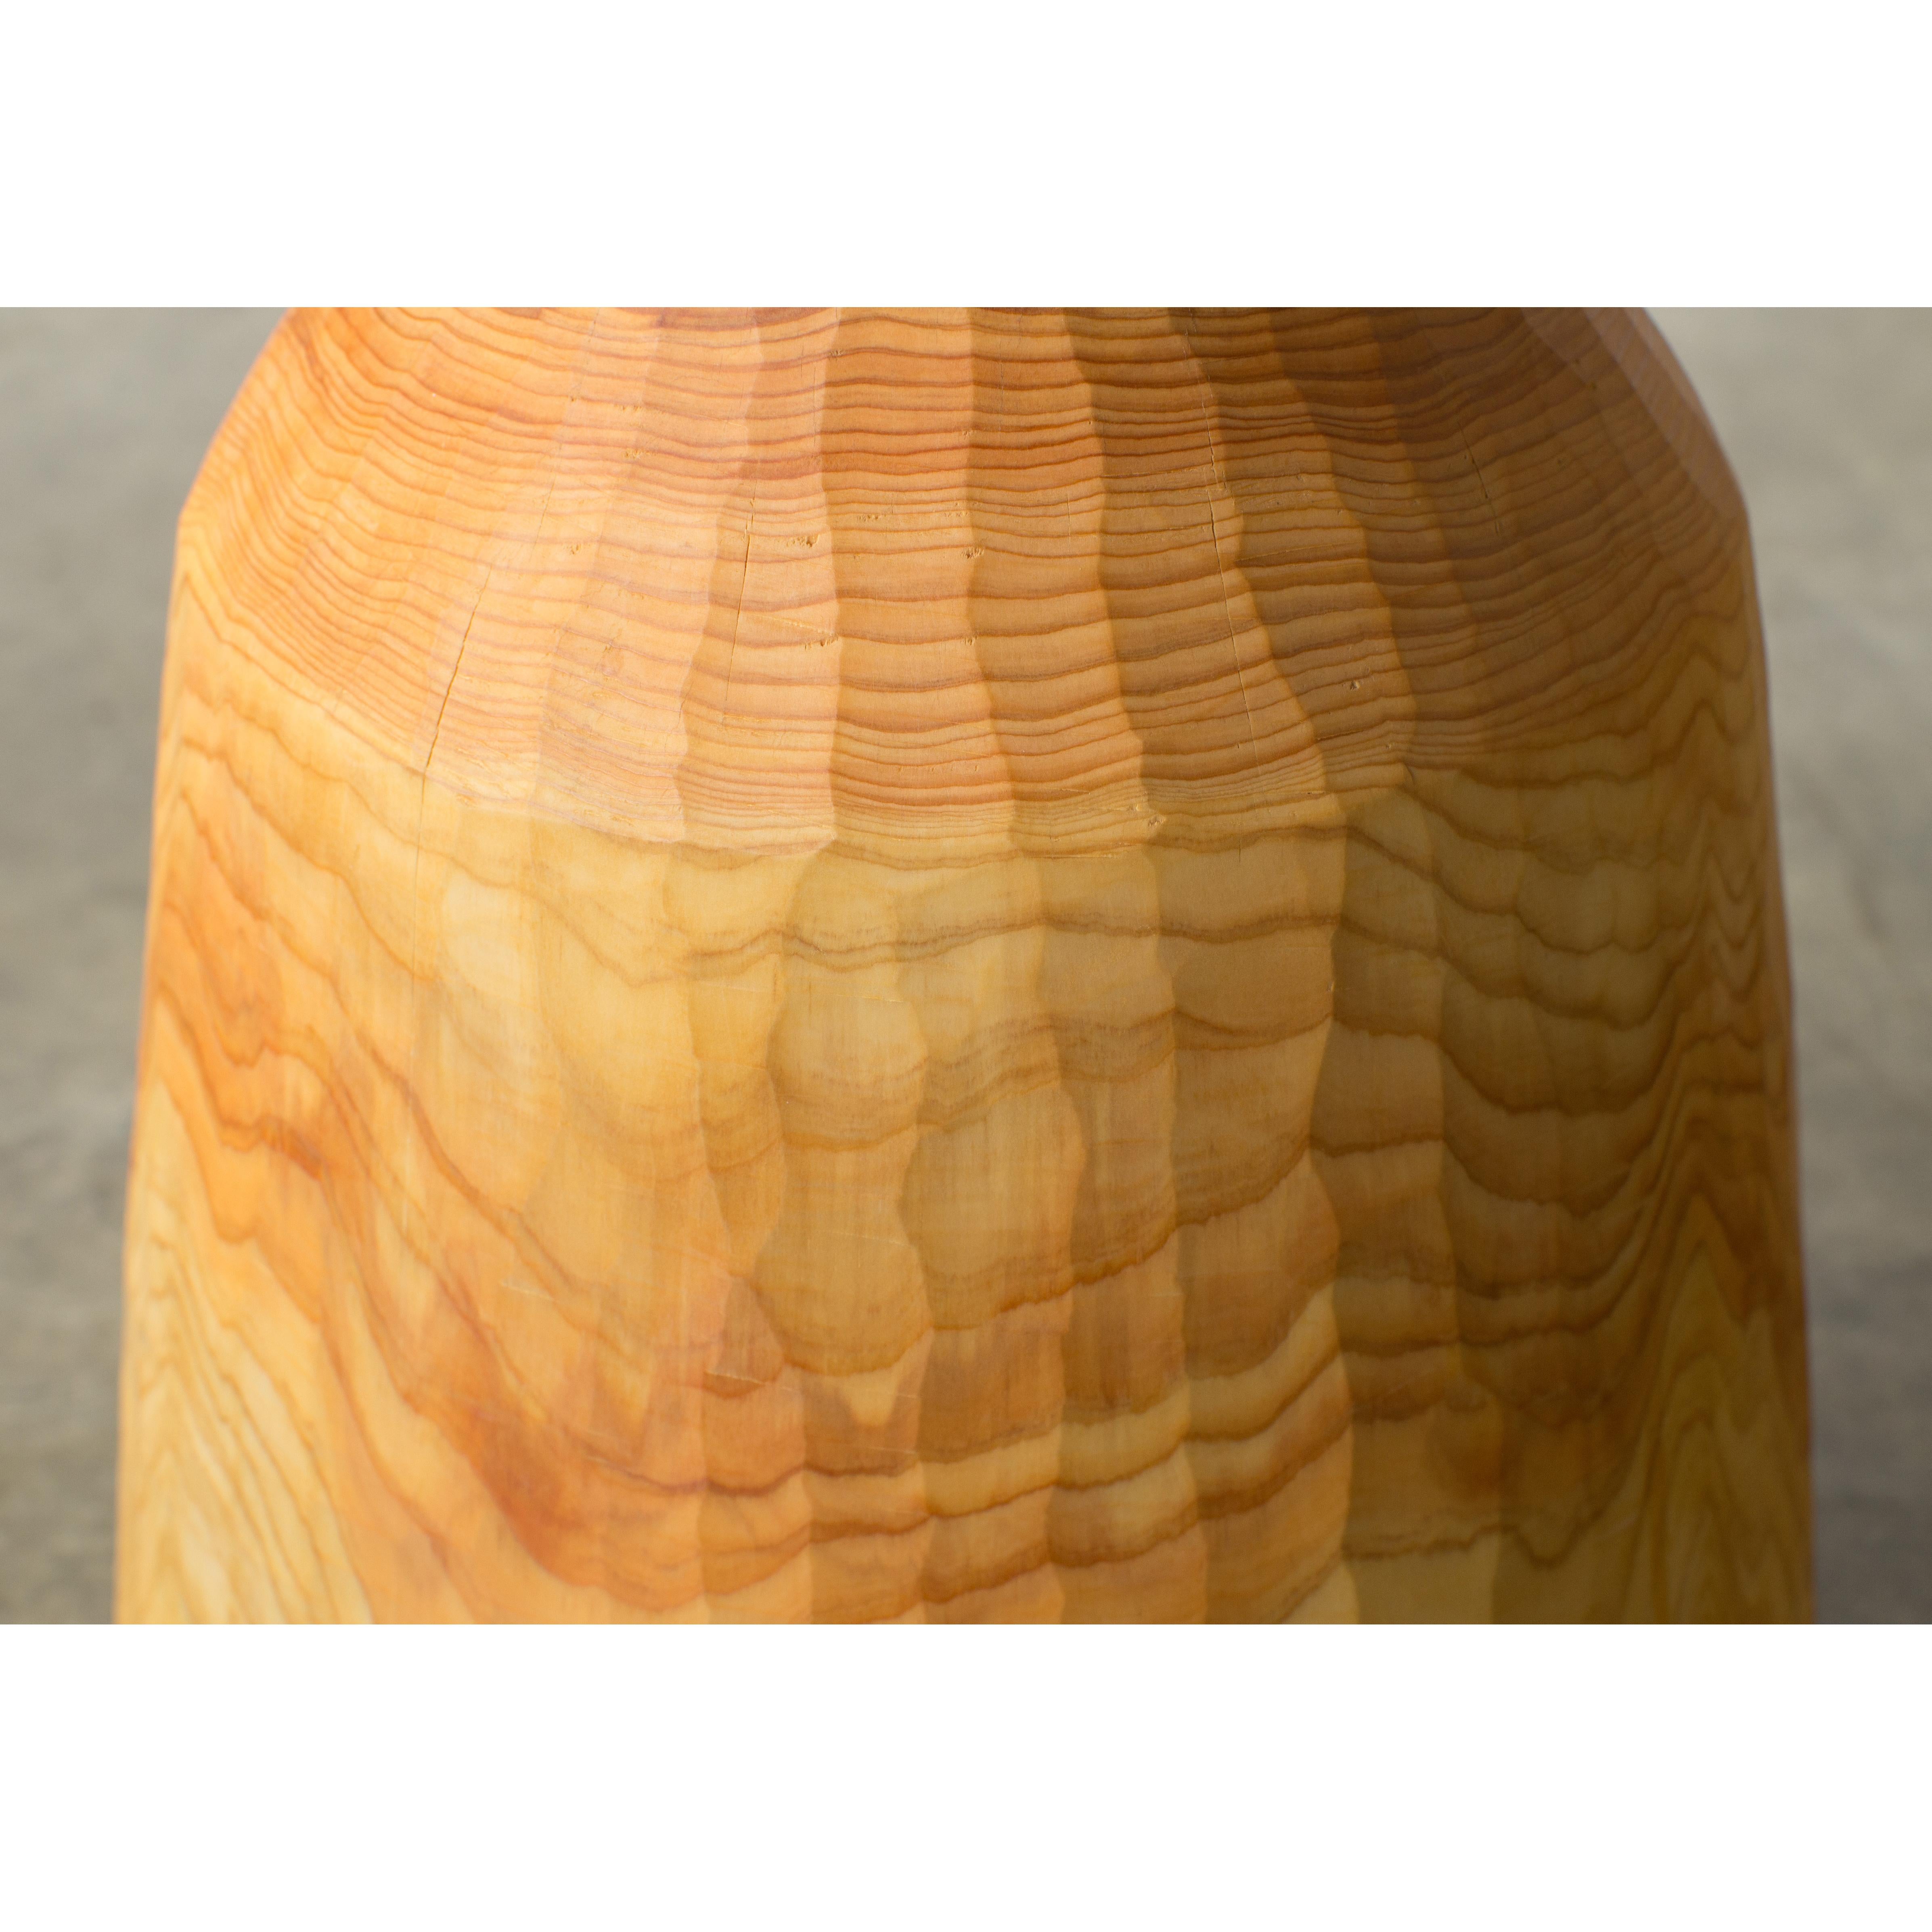 Contemporary Hiroyuki Nishimura and Zogei Furniture Sculptural Stool19 Tribal Glamping For Sale